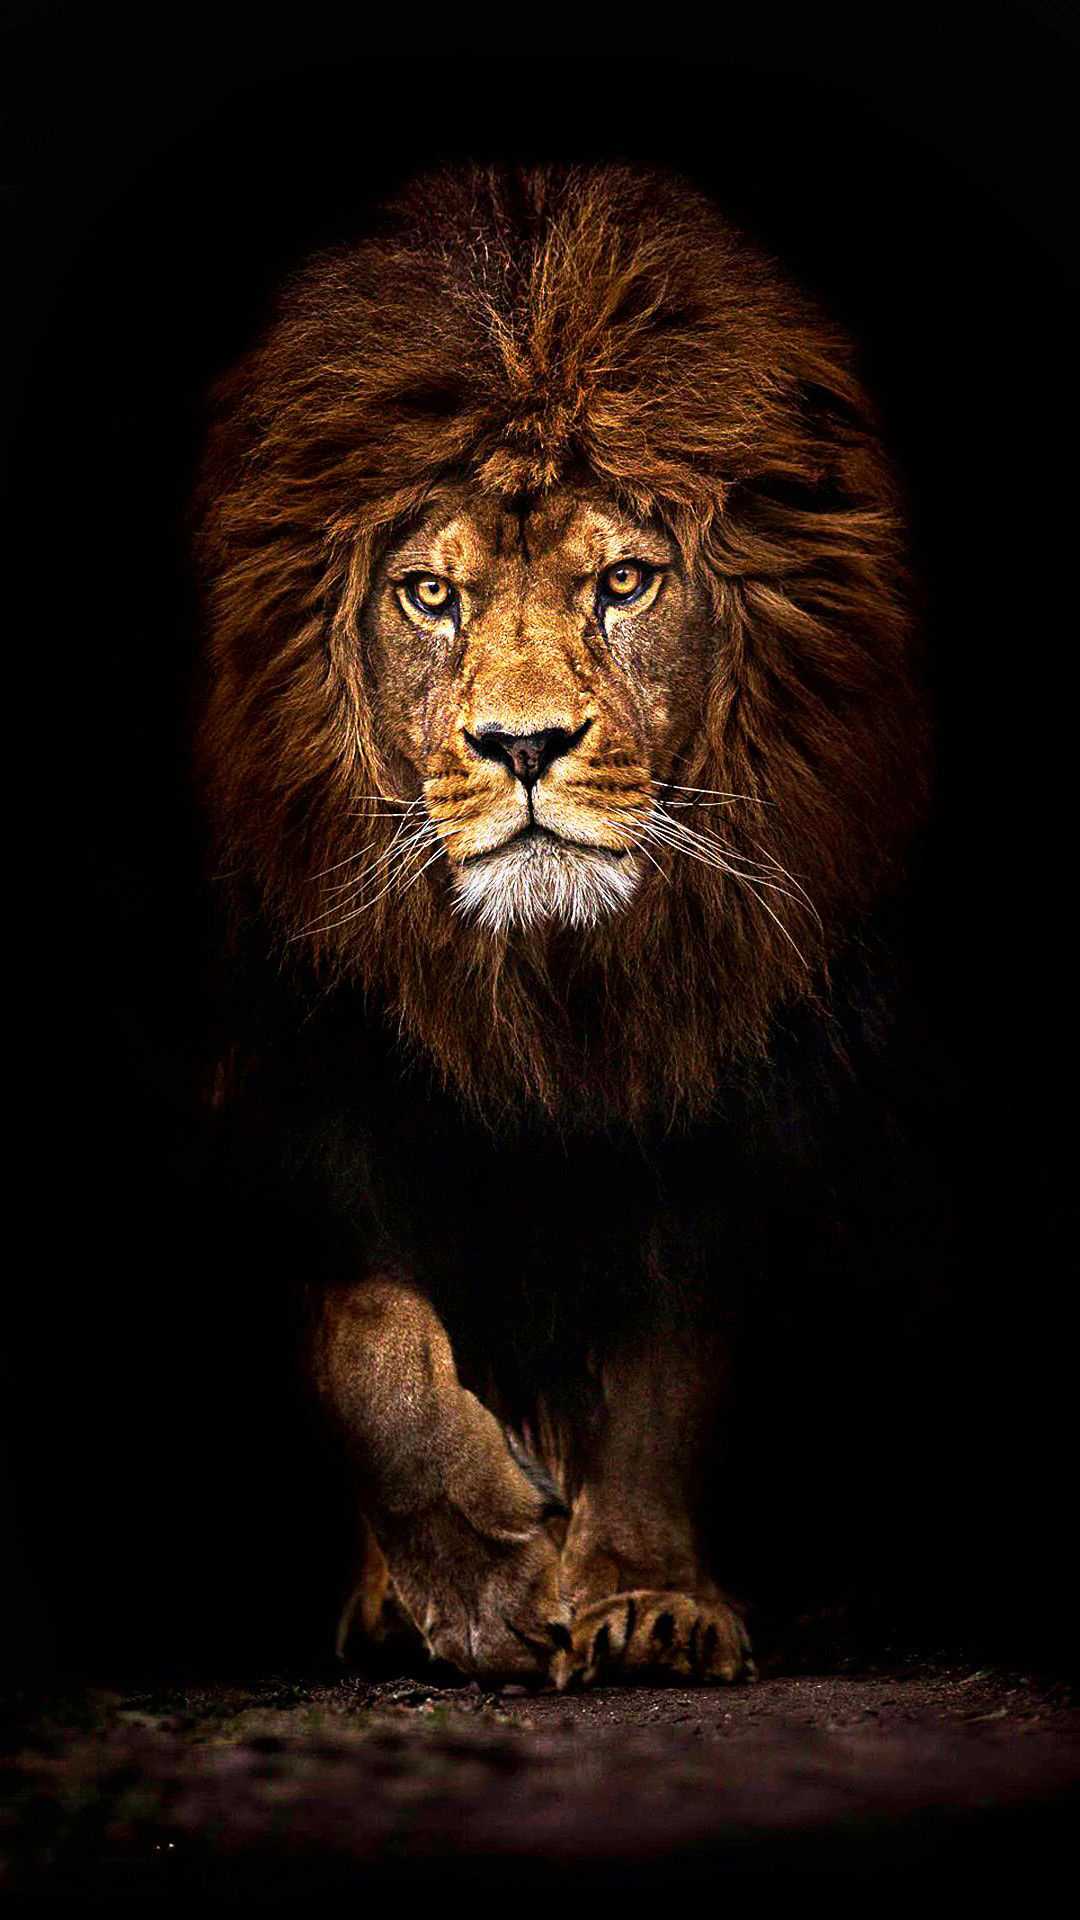 A dark background with a lion in the foreground. - Lion